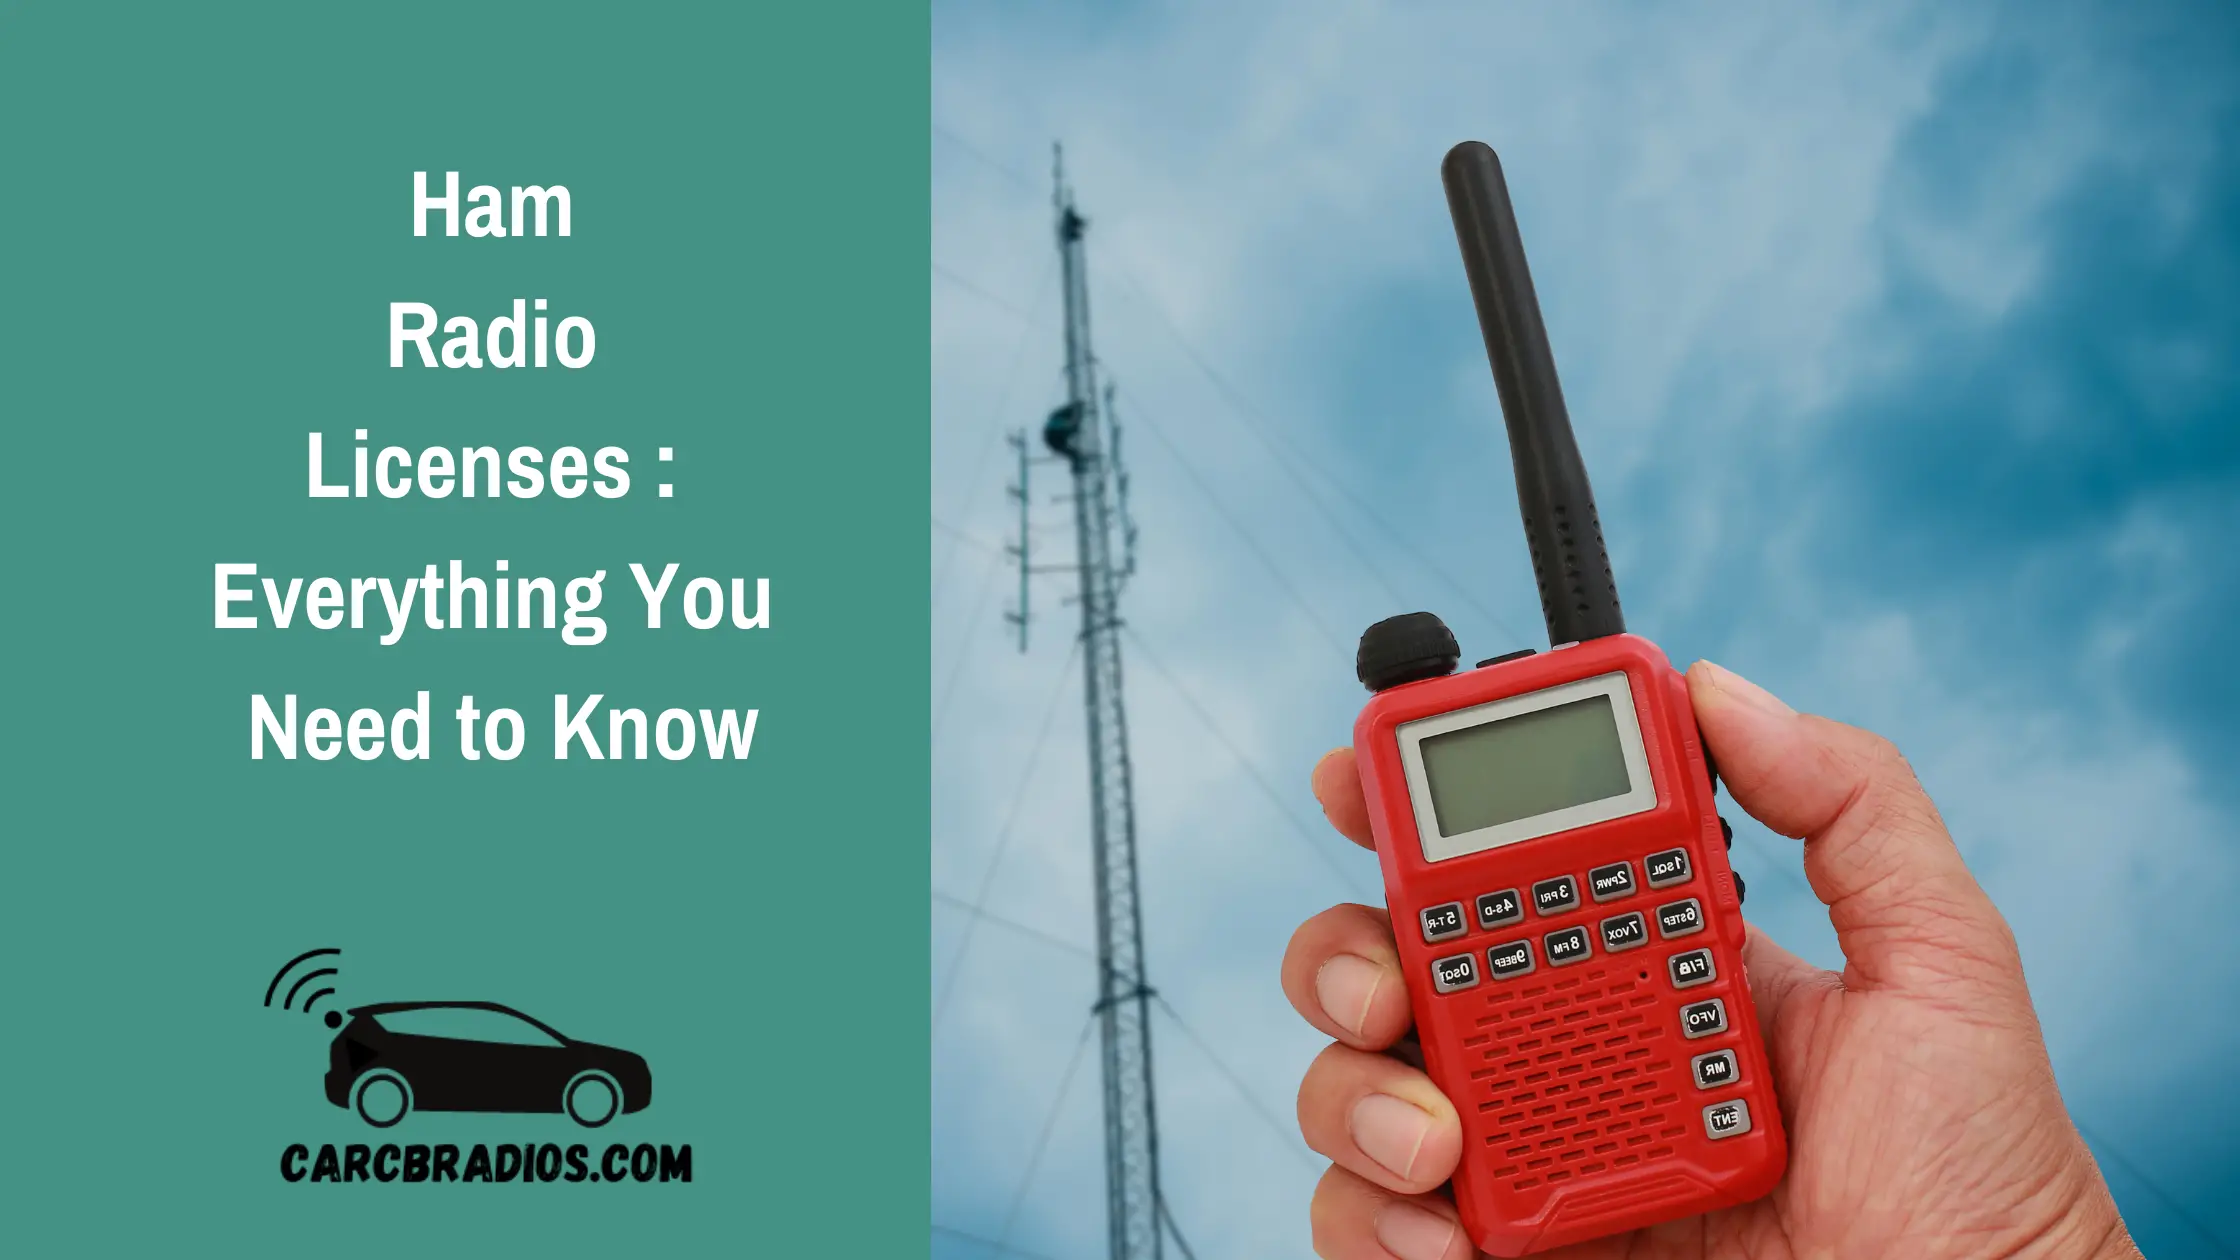 Ham Radio Licences - this article covers the three most important details about the 3 current Ham Radio licences available. 